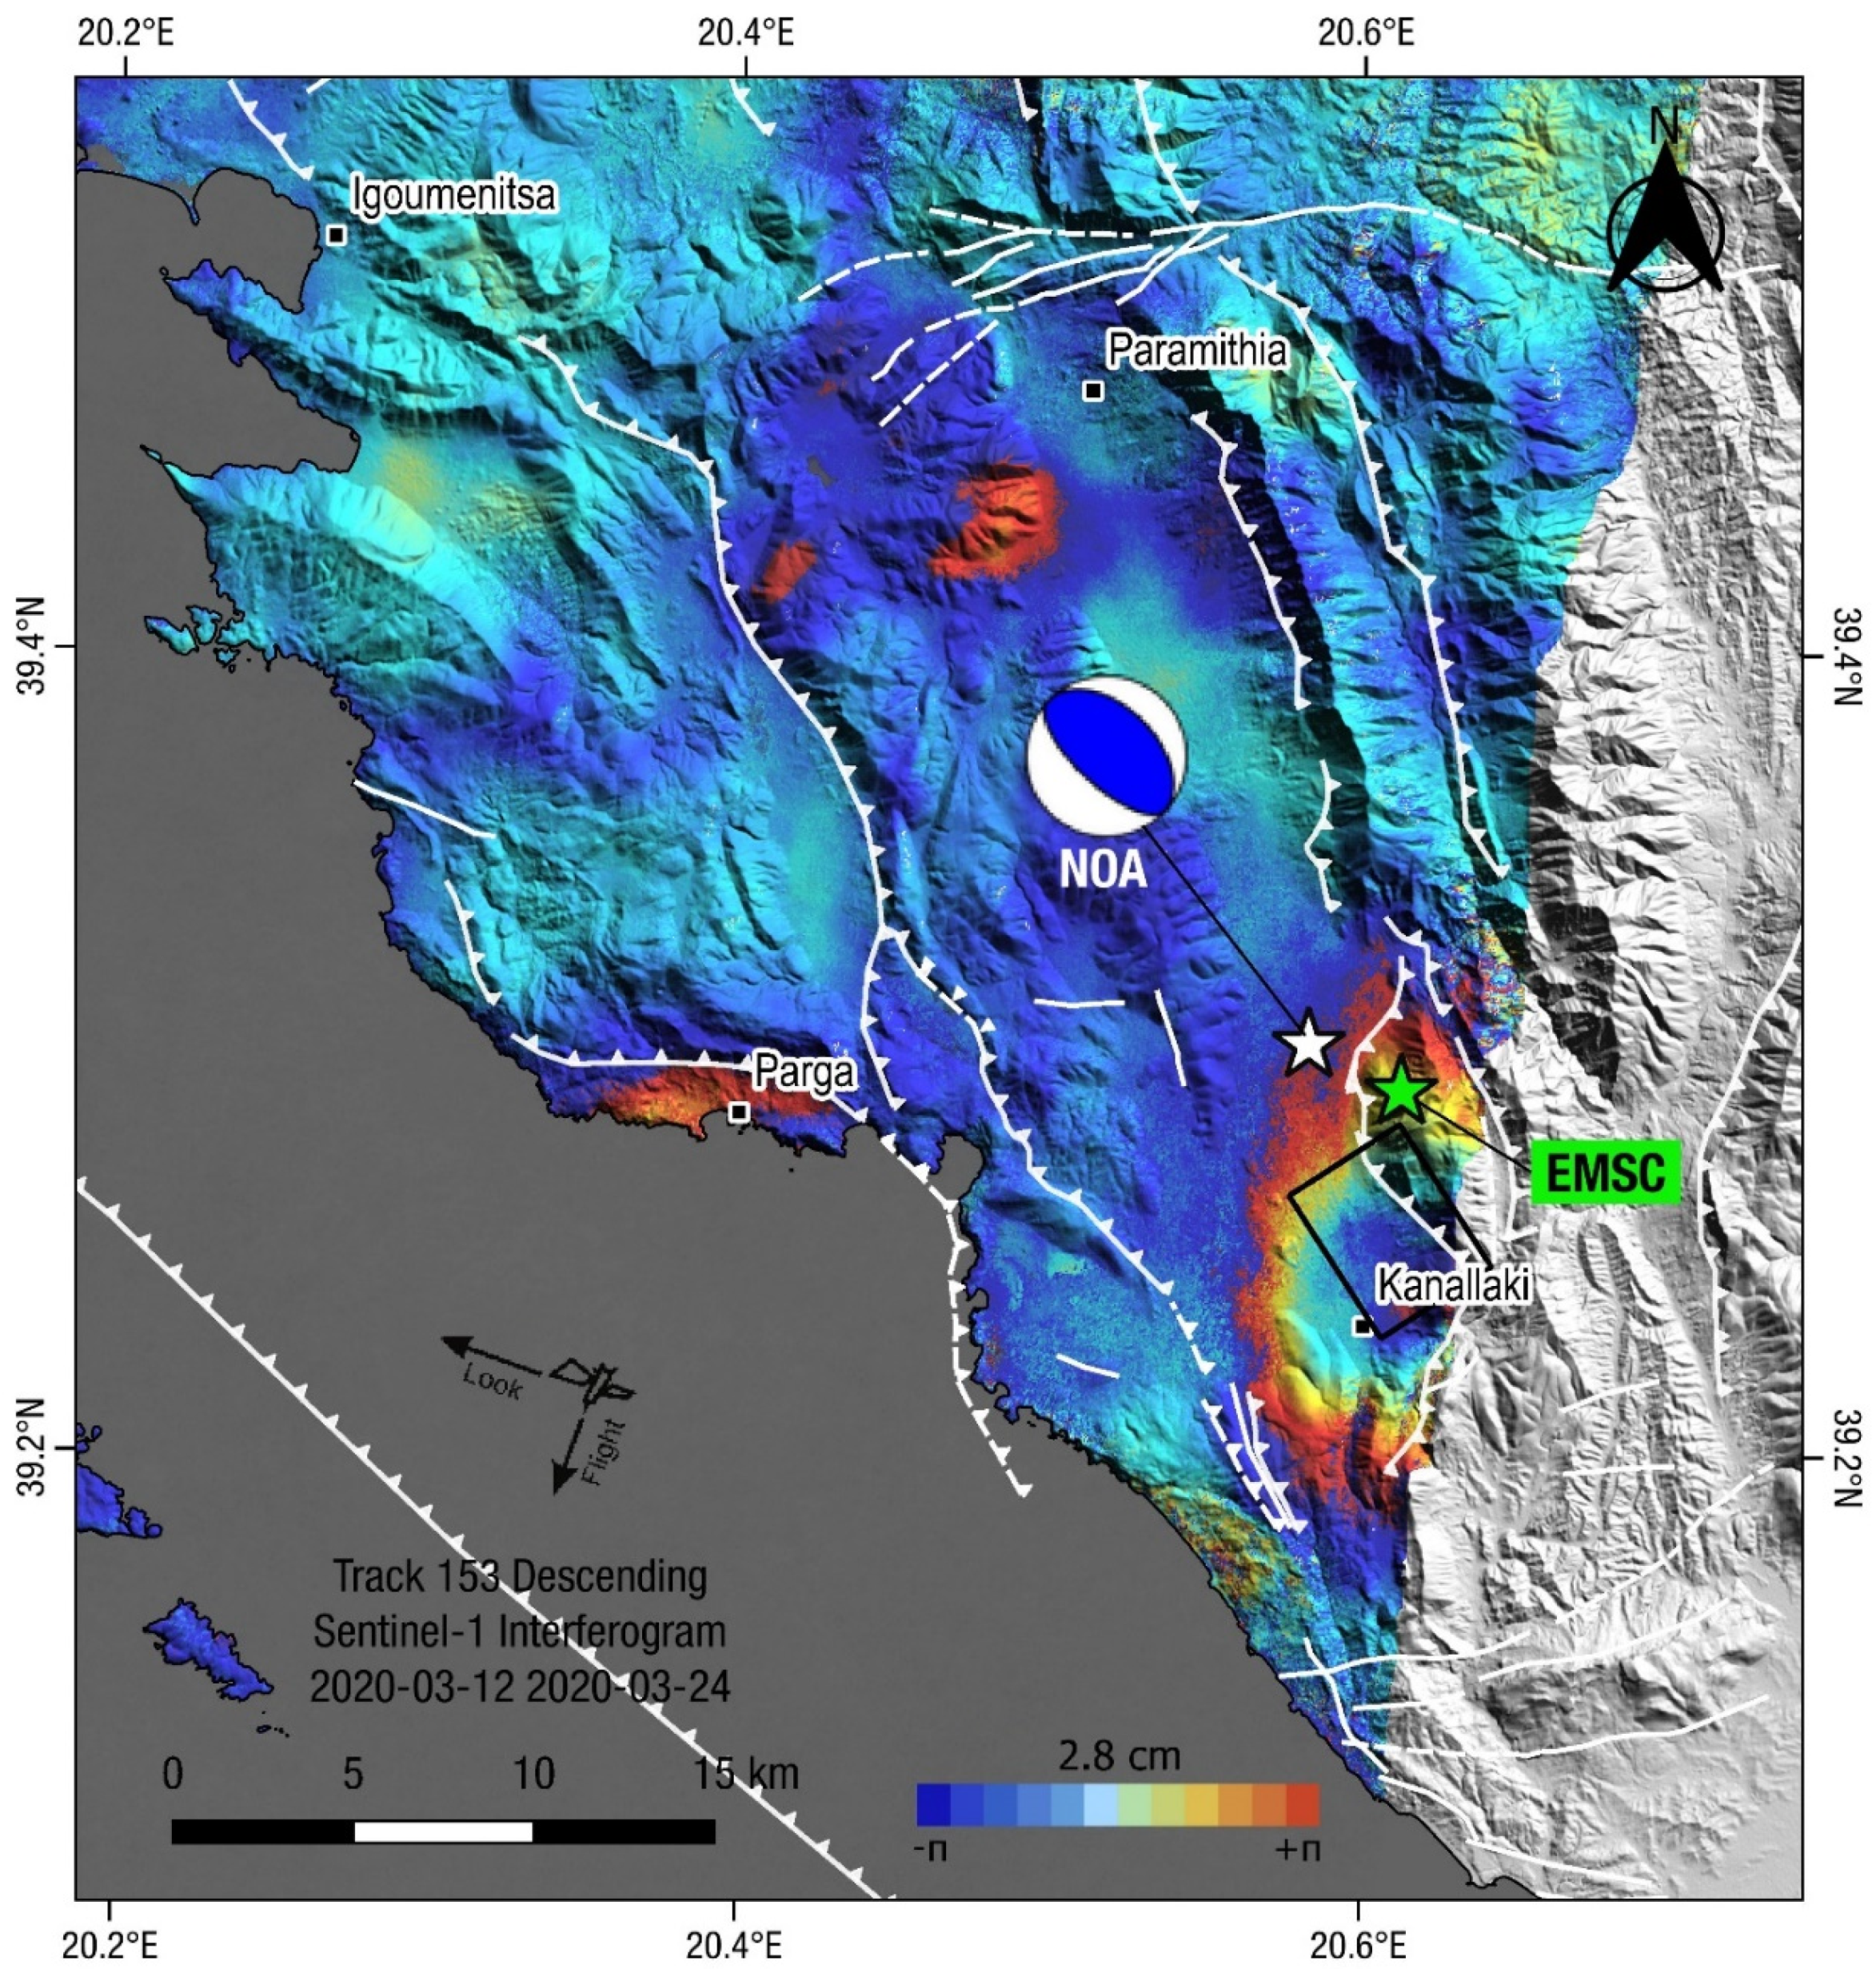 Geosciences | Free Full-Text | The Mw = 5.6 Kanallaki Earthquake of 21  March 2020 in West Epirus, Greece: Reverse Fault Model from InSAR Data and  Seismotectonic Implications for Apulia-Eurasia Collision | HTML